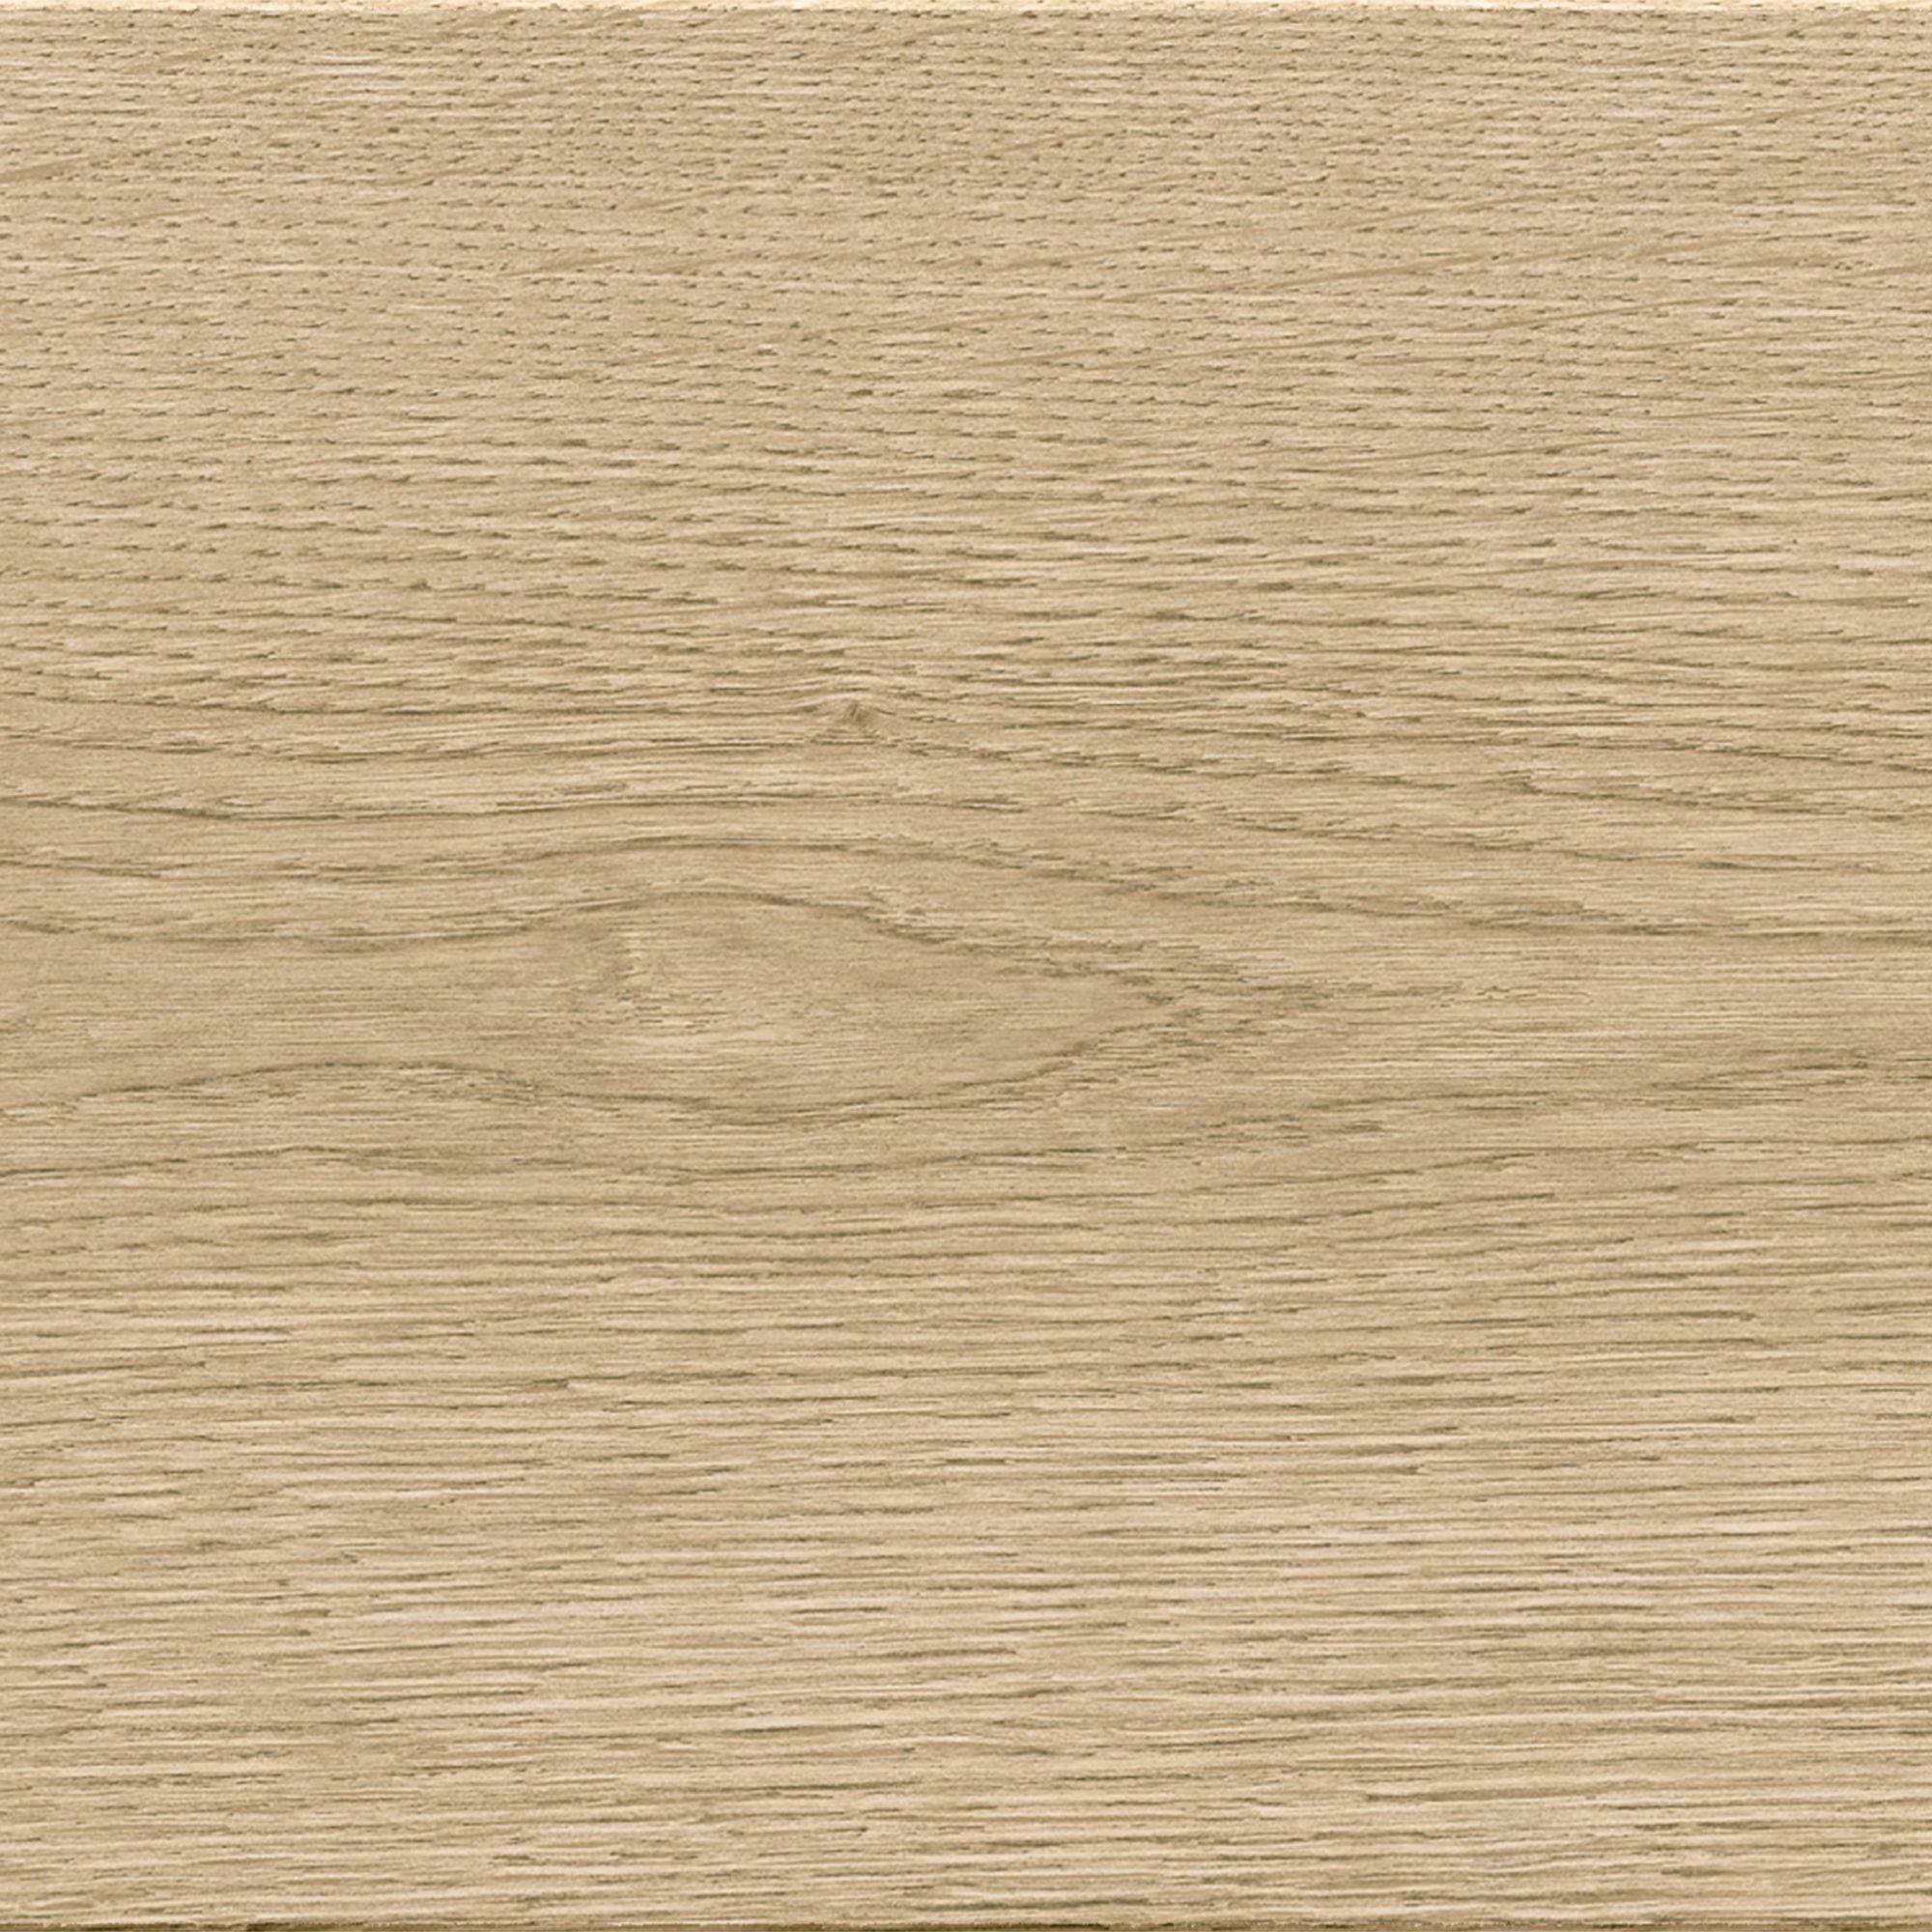 GoodHome Bicester Wide Structured Oak effect Laminate flooring Sample